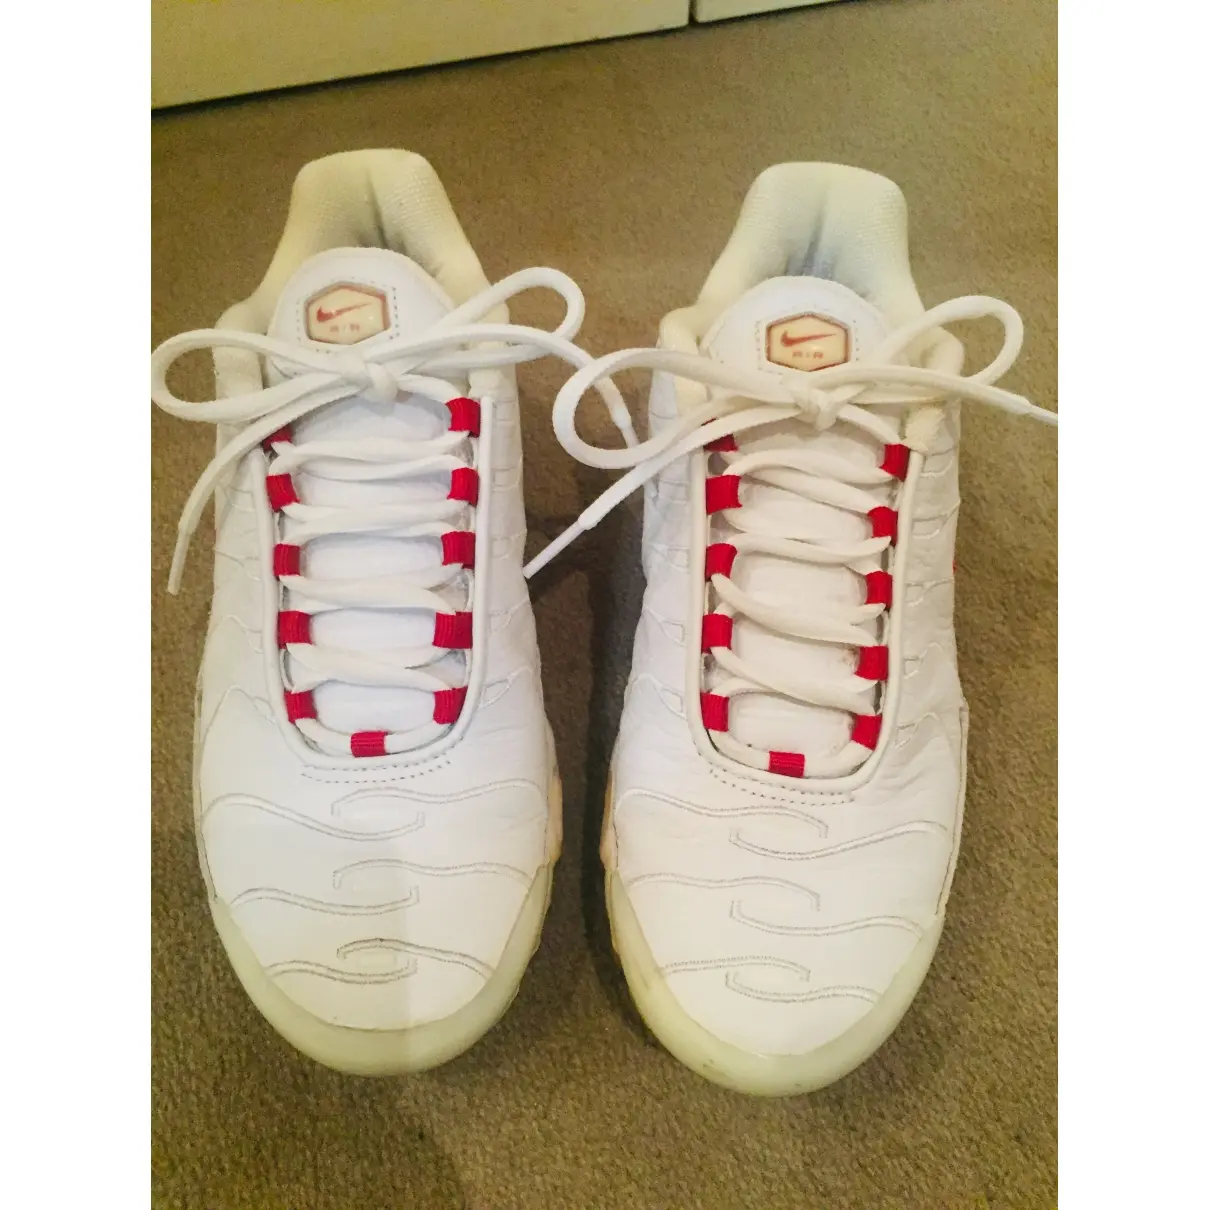 Nike Air Max Plus leather trainers for sale